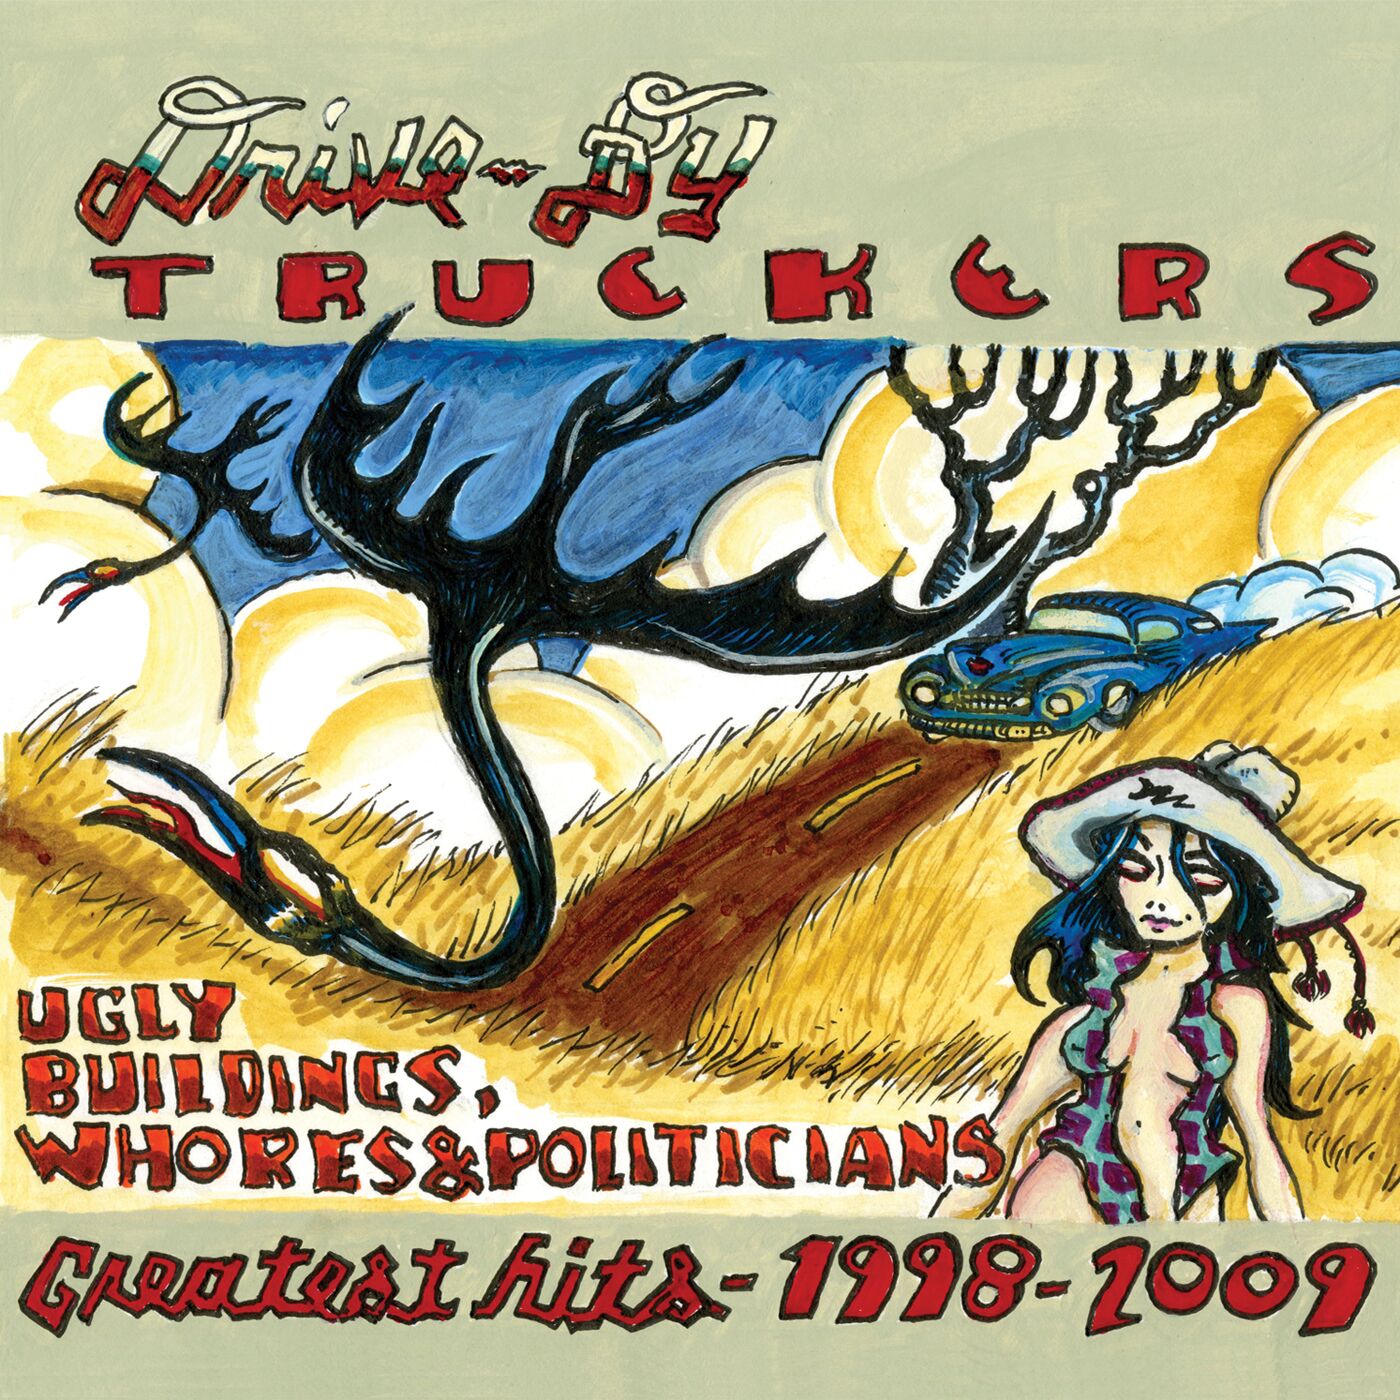 Drive-By Truckers - Greatest Hits 1998-2009 [CD]